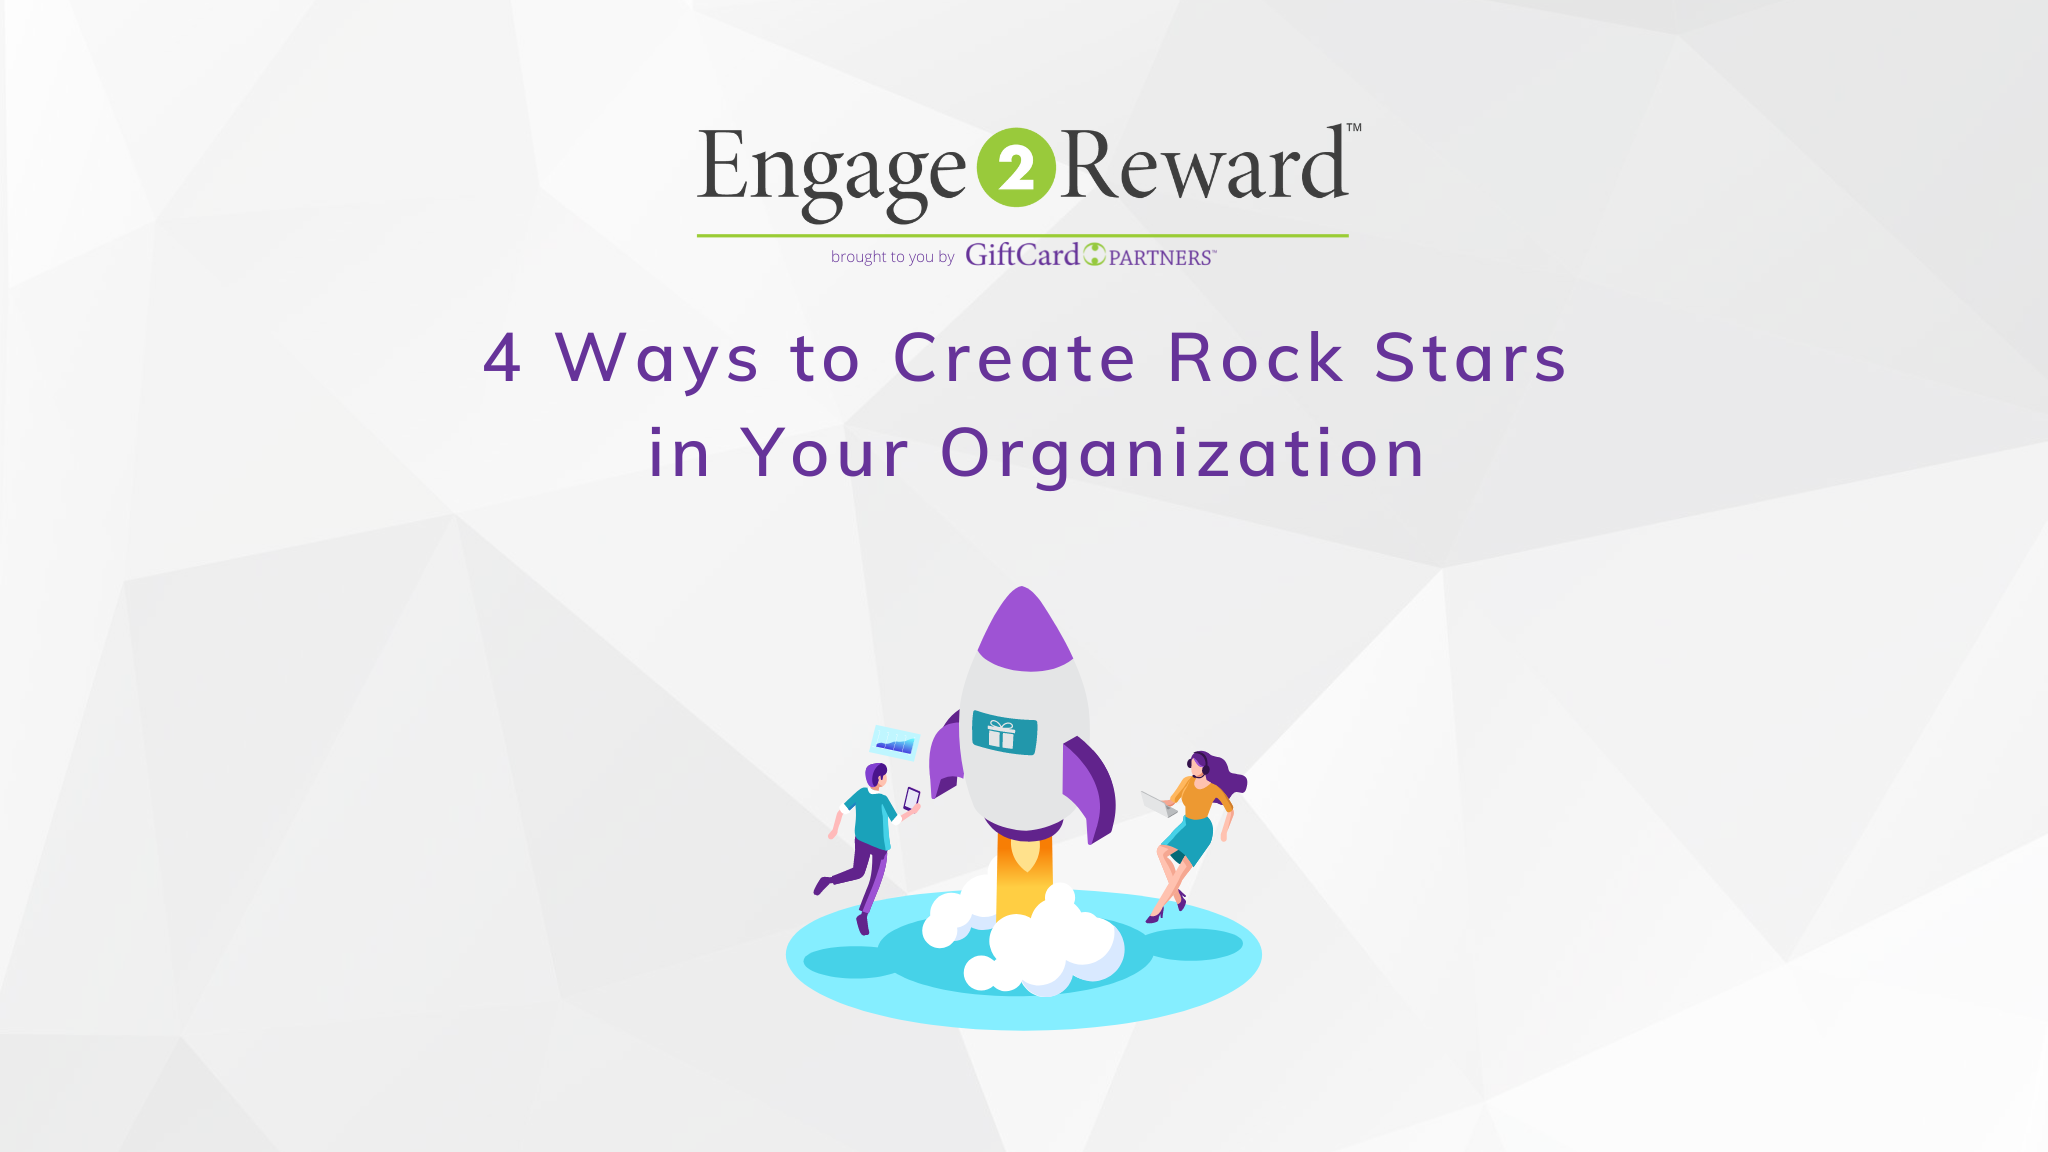 4 Ways to Create Rock Stars in Your Organization